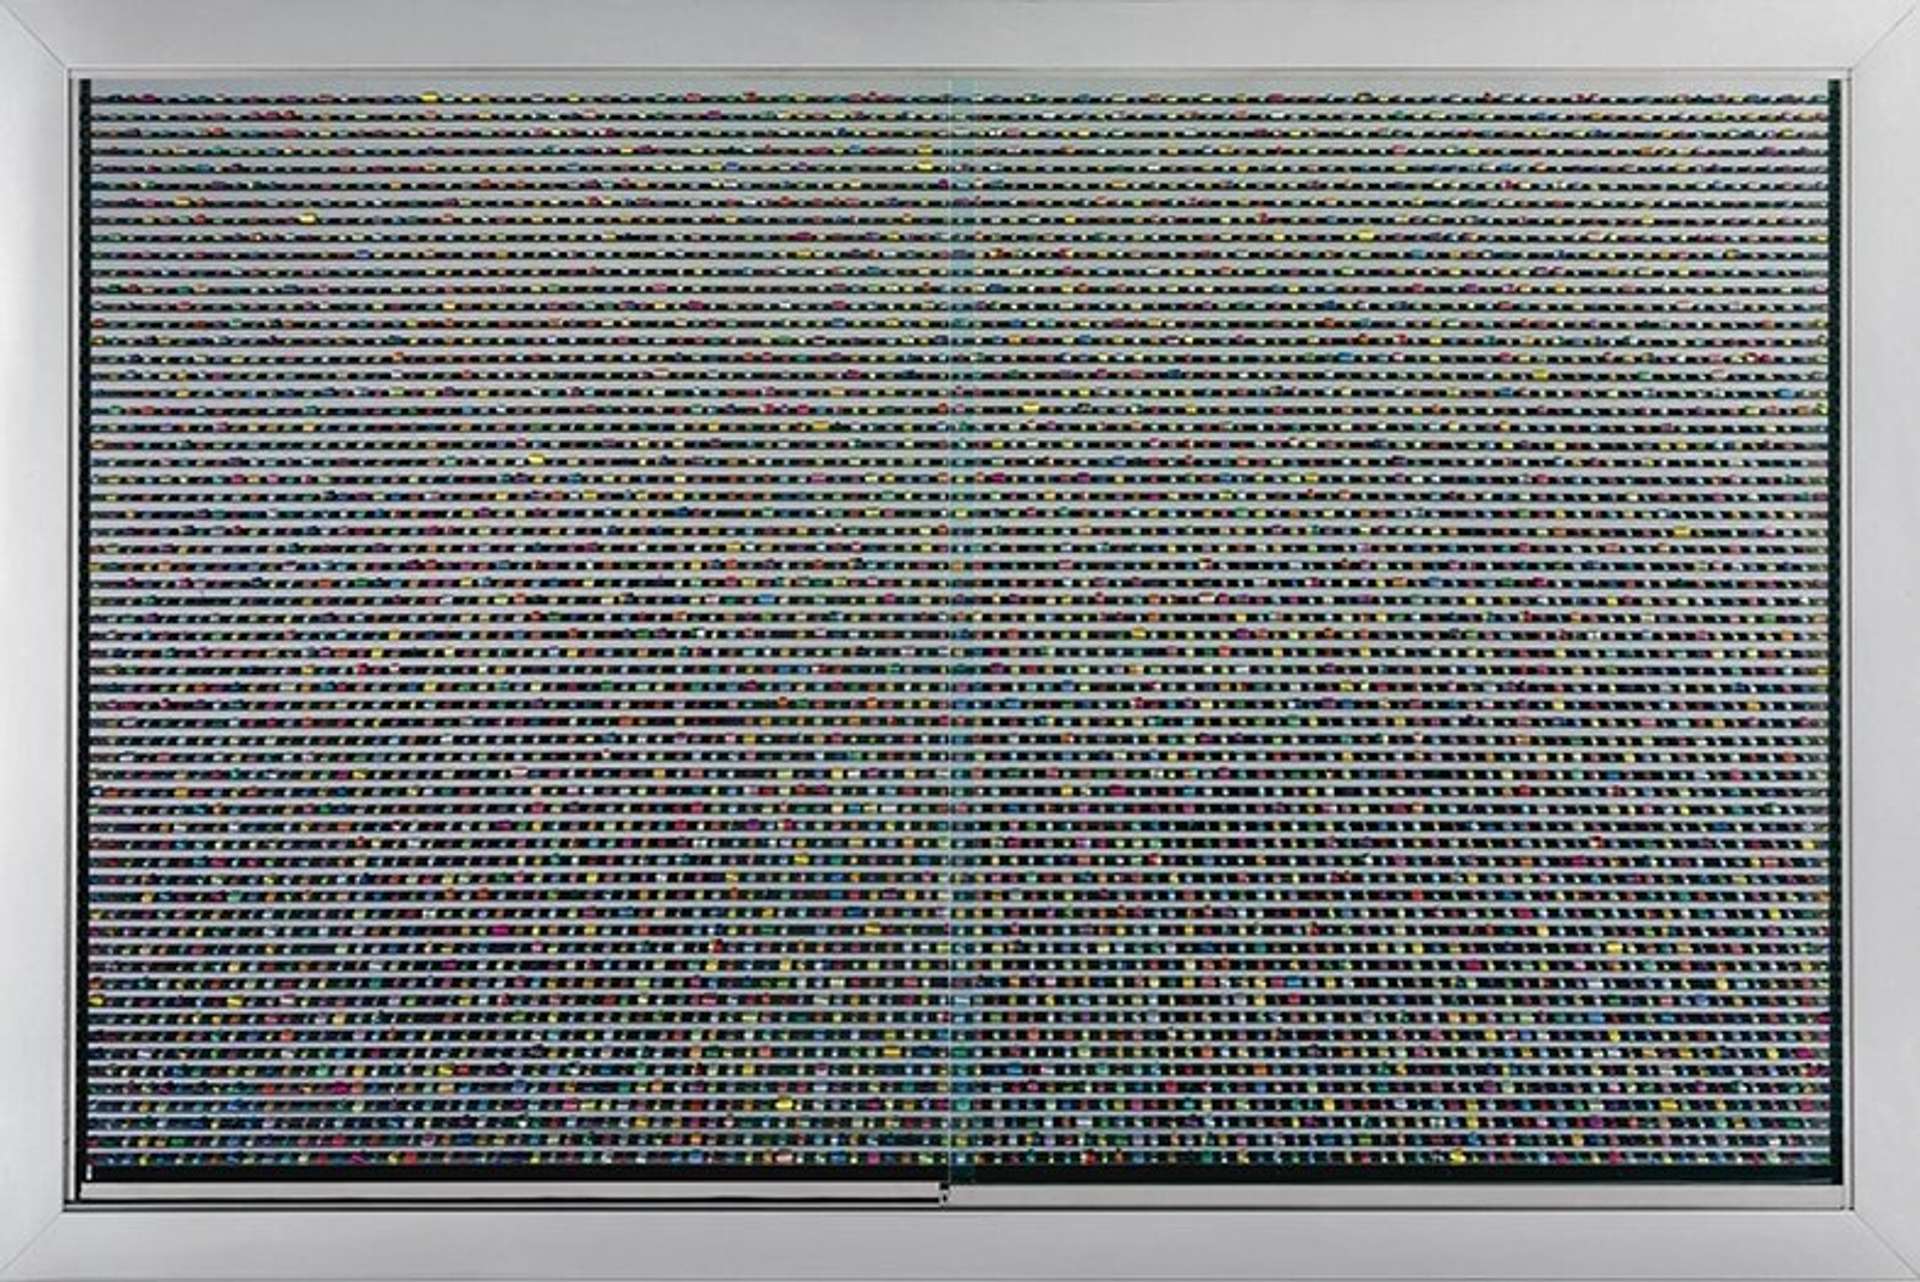 Lullaby Spring by Damien Hirst